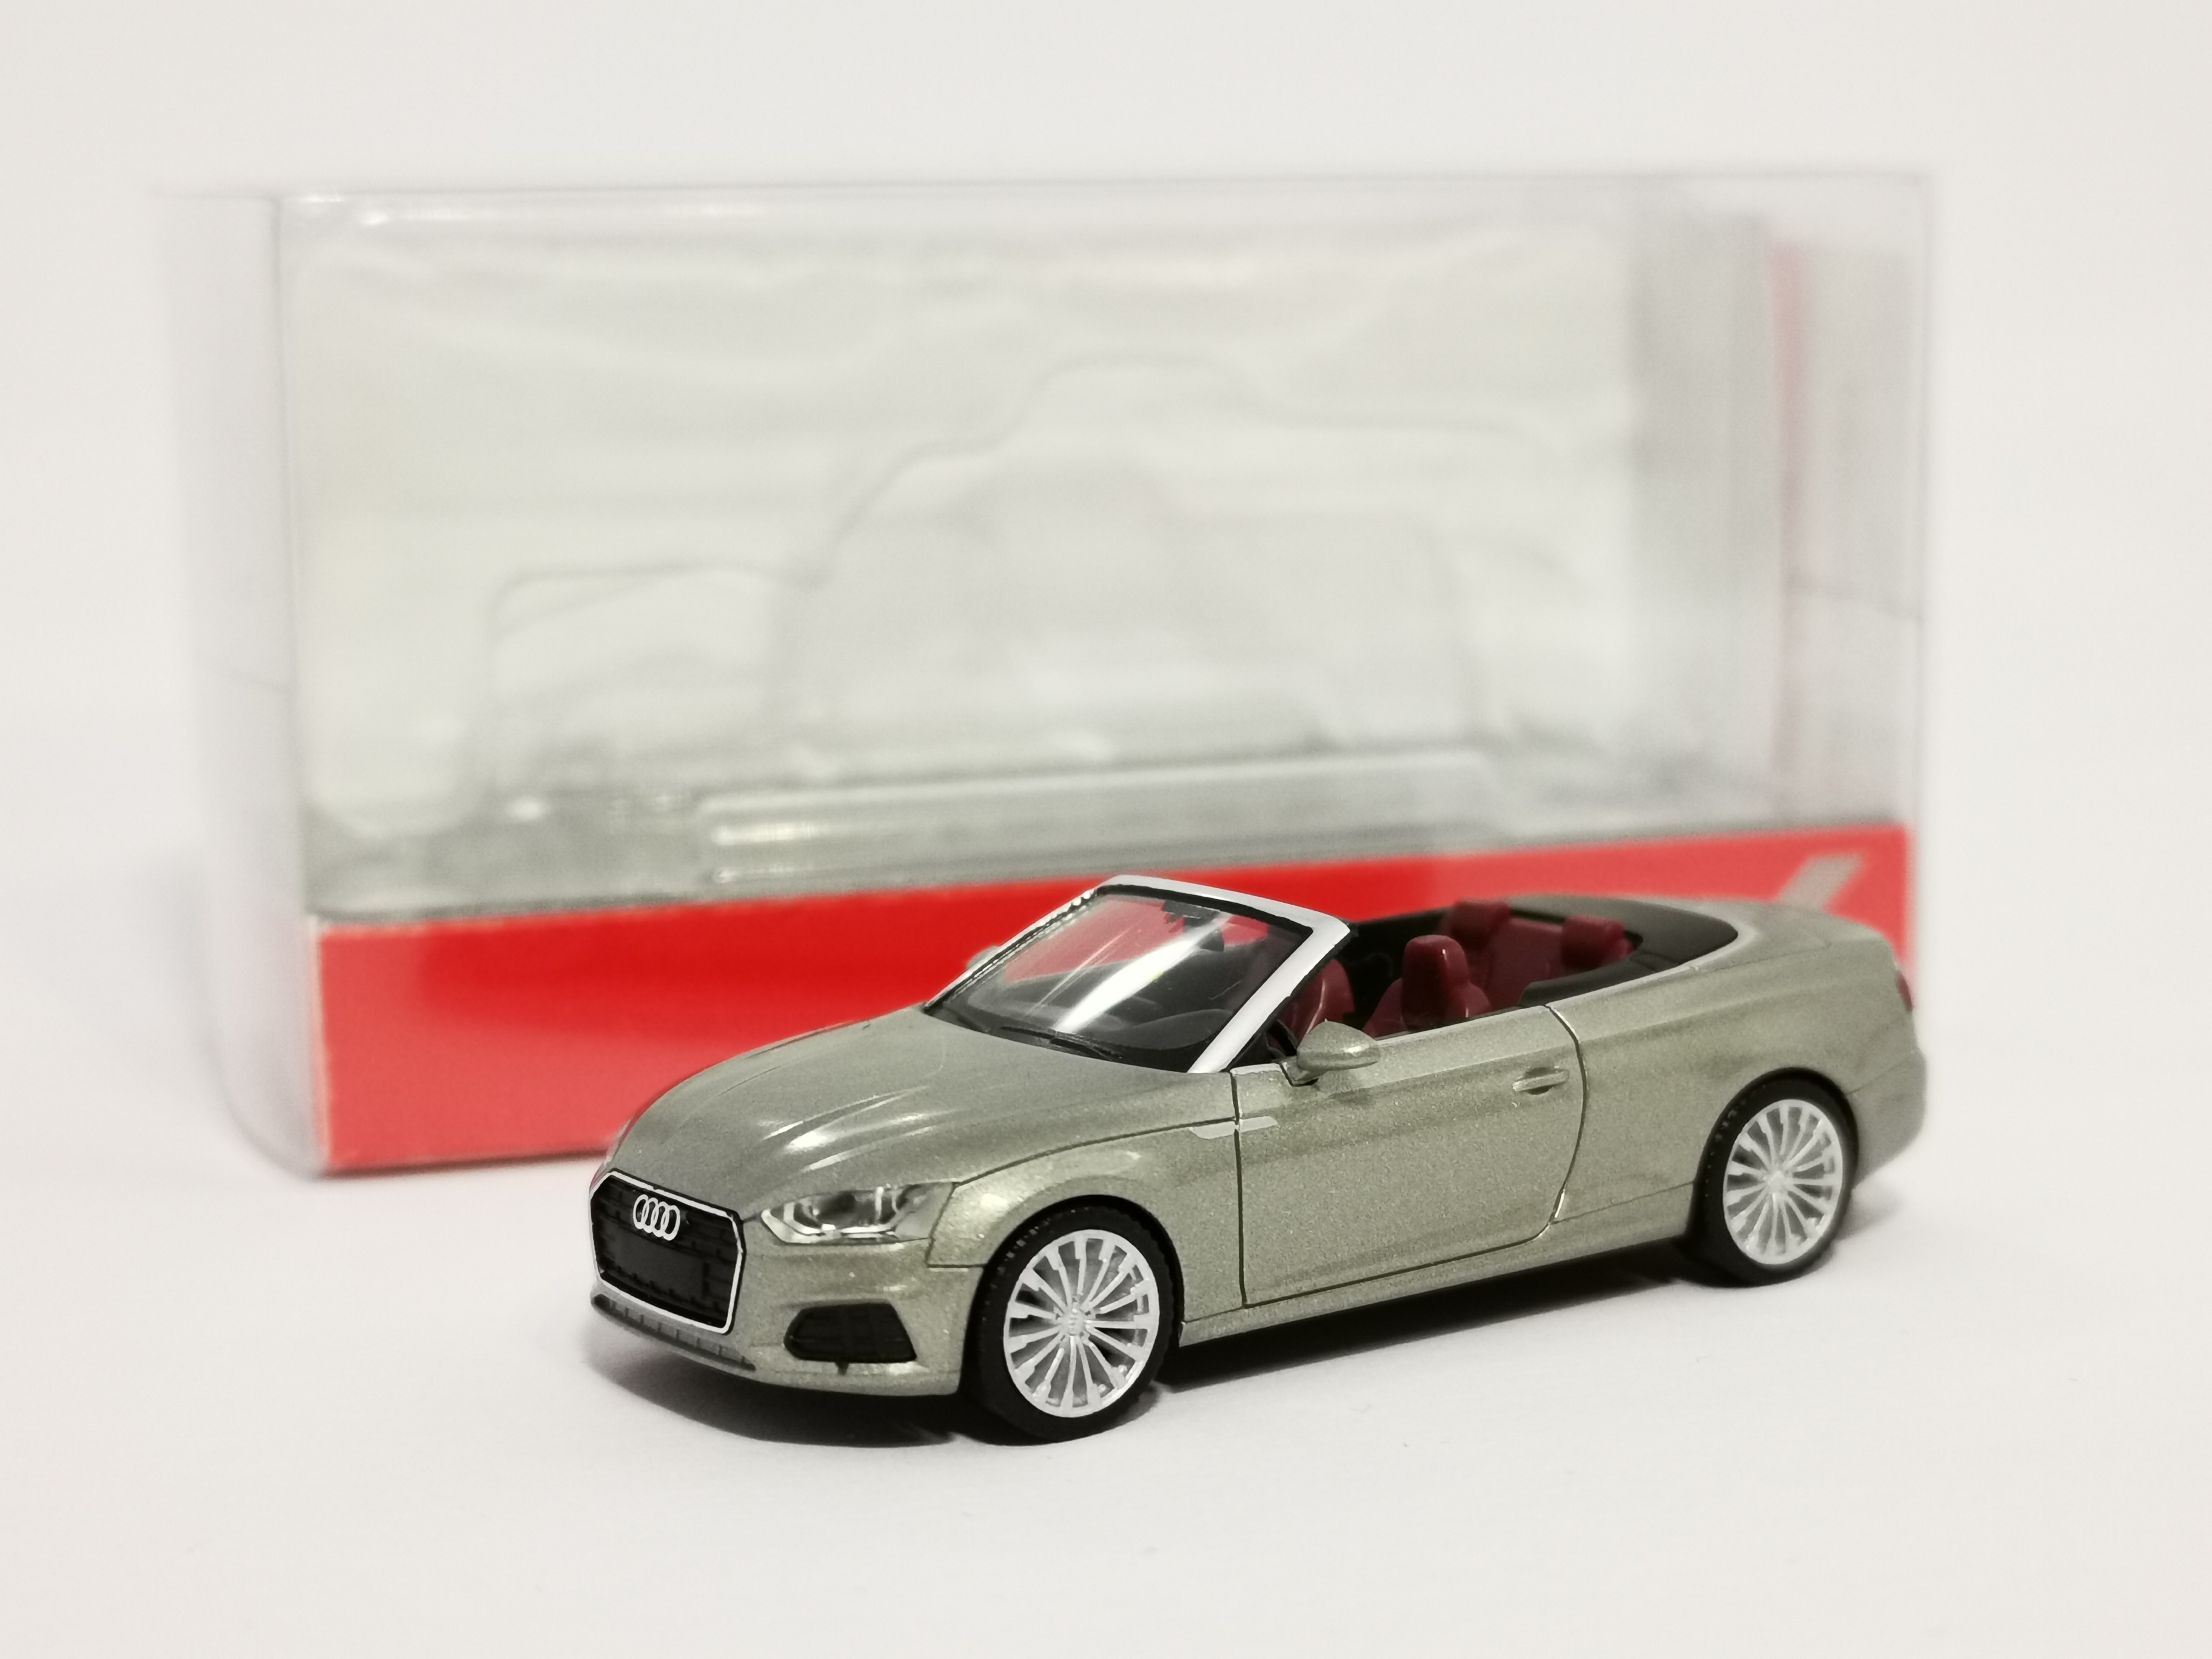 #28769 for sale online Herpa AUDI A5 Convertible 